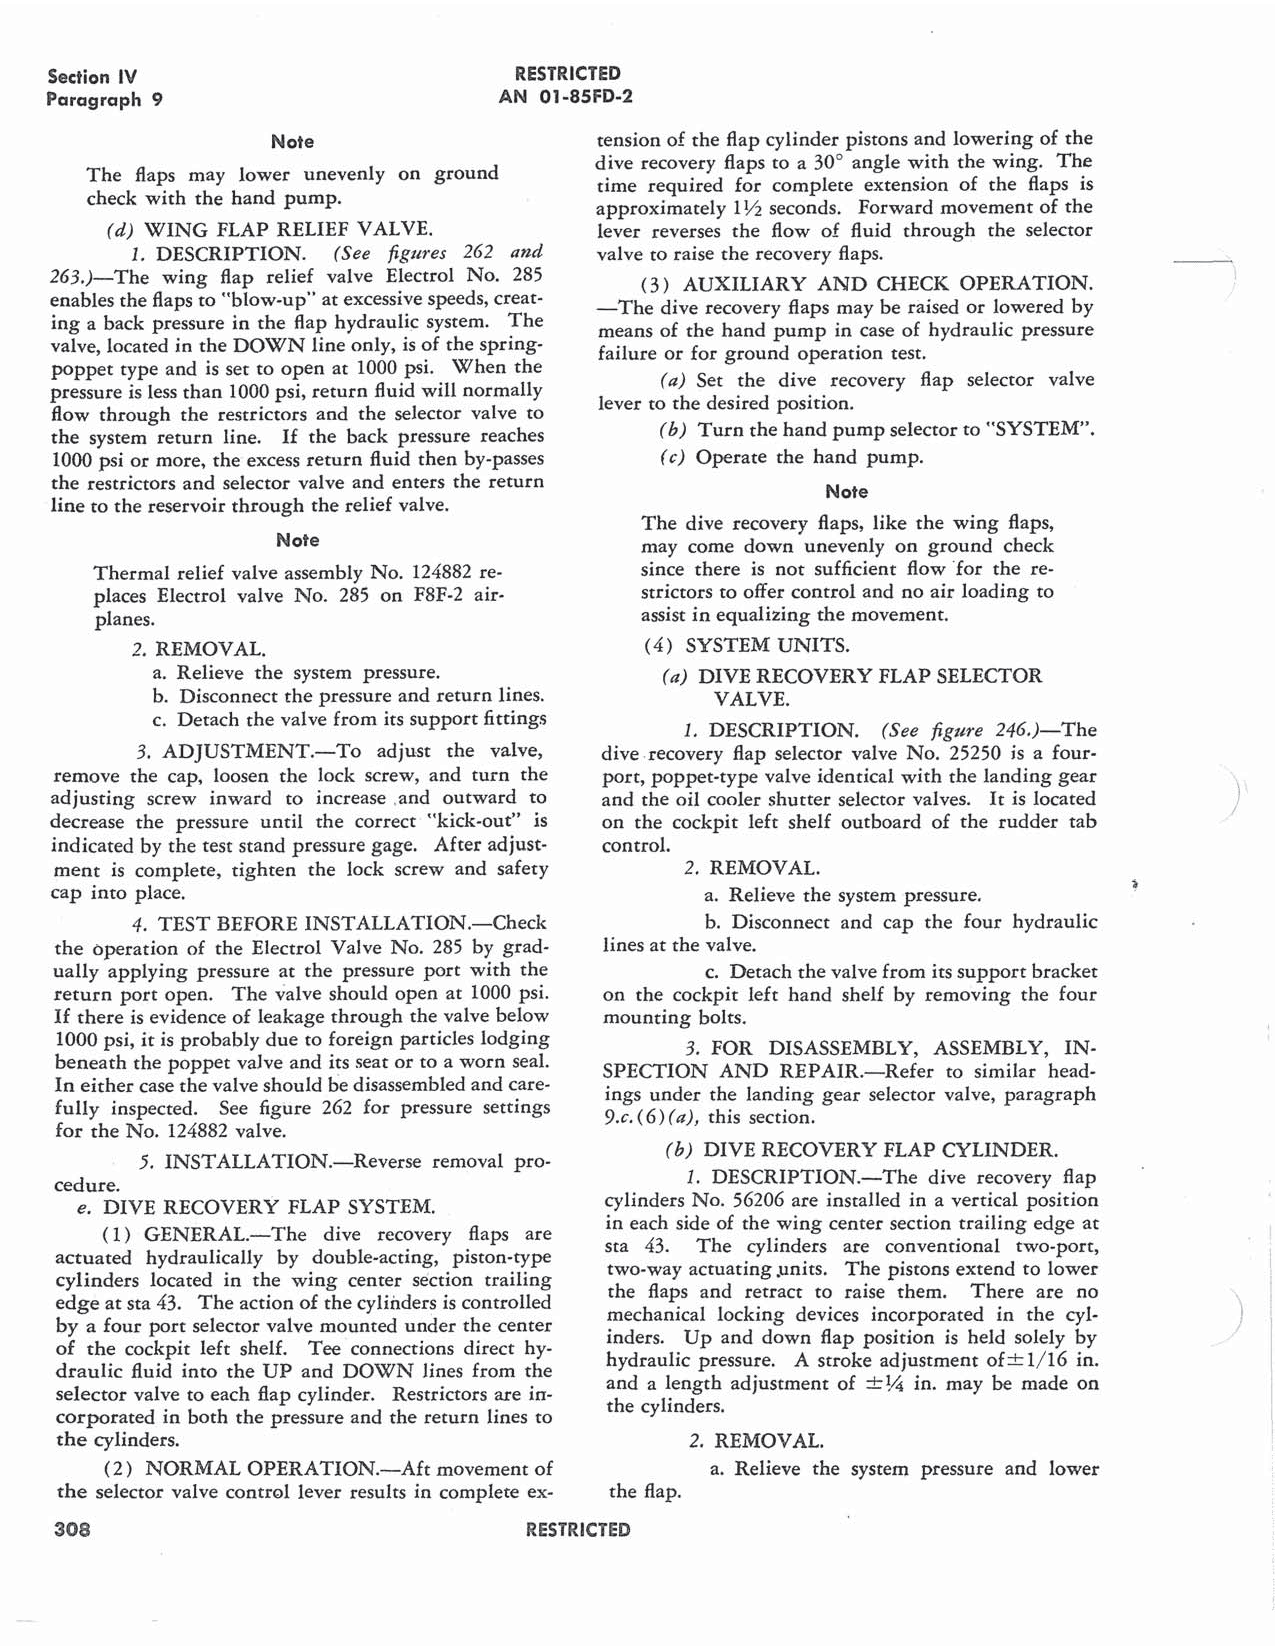 Sample page 287 from AirCorps Library document: Erection & Maintenance - F8F